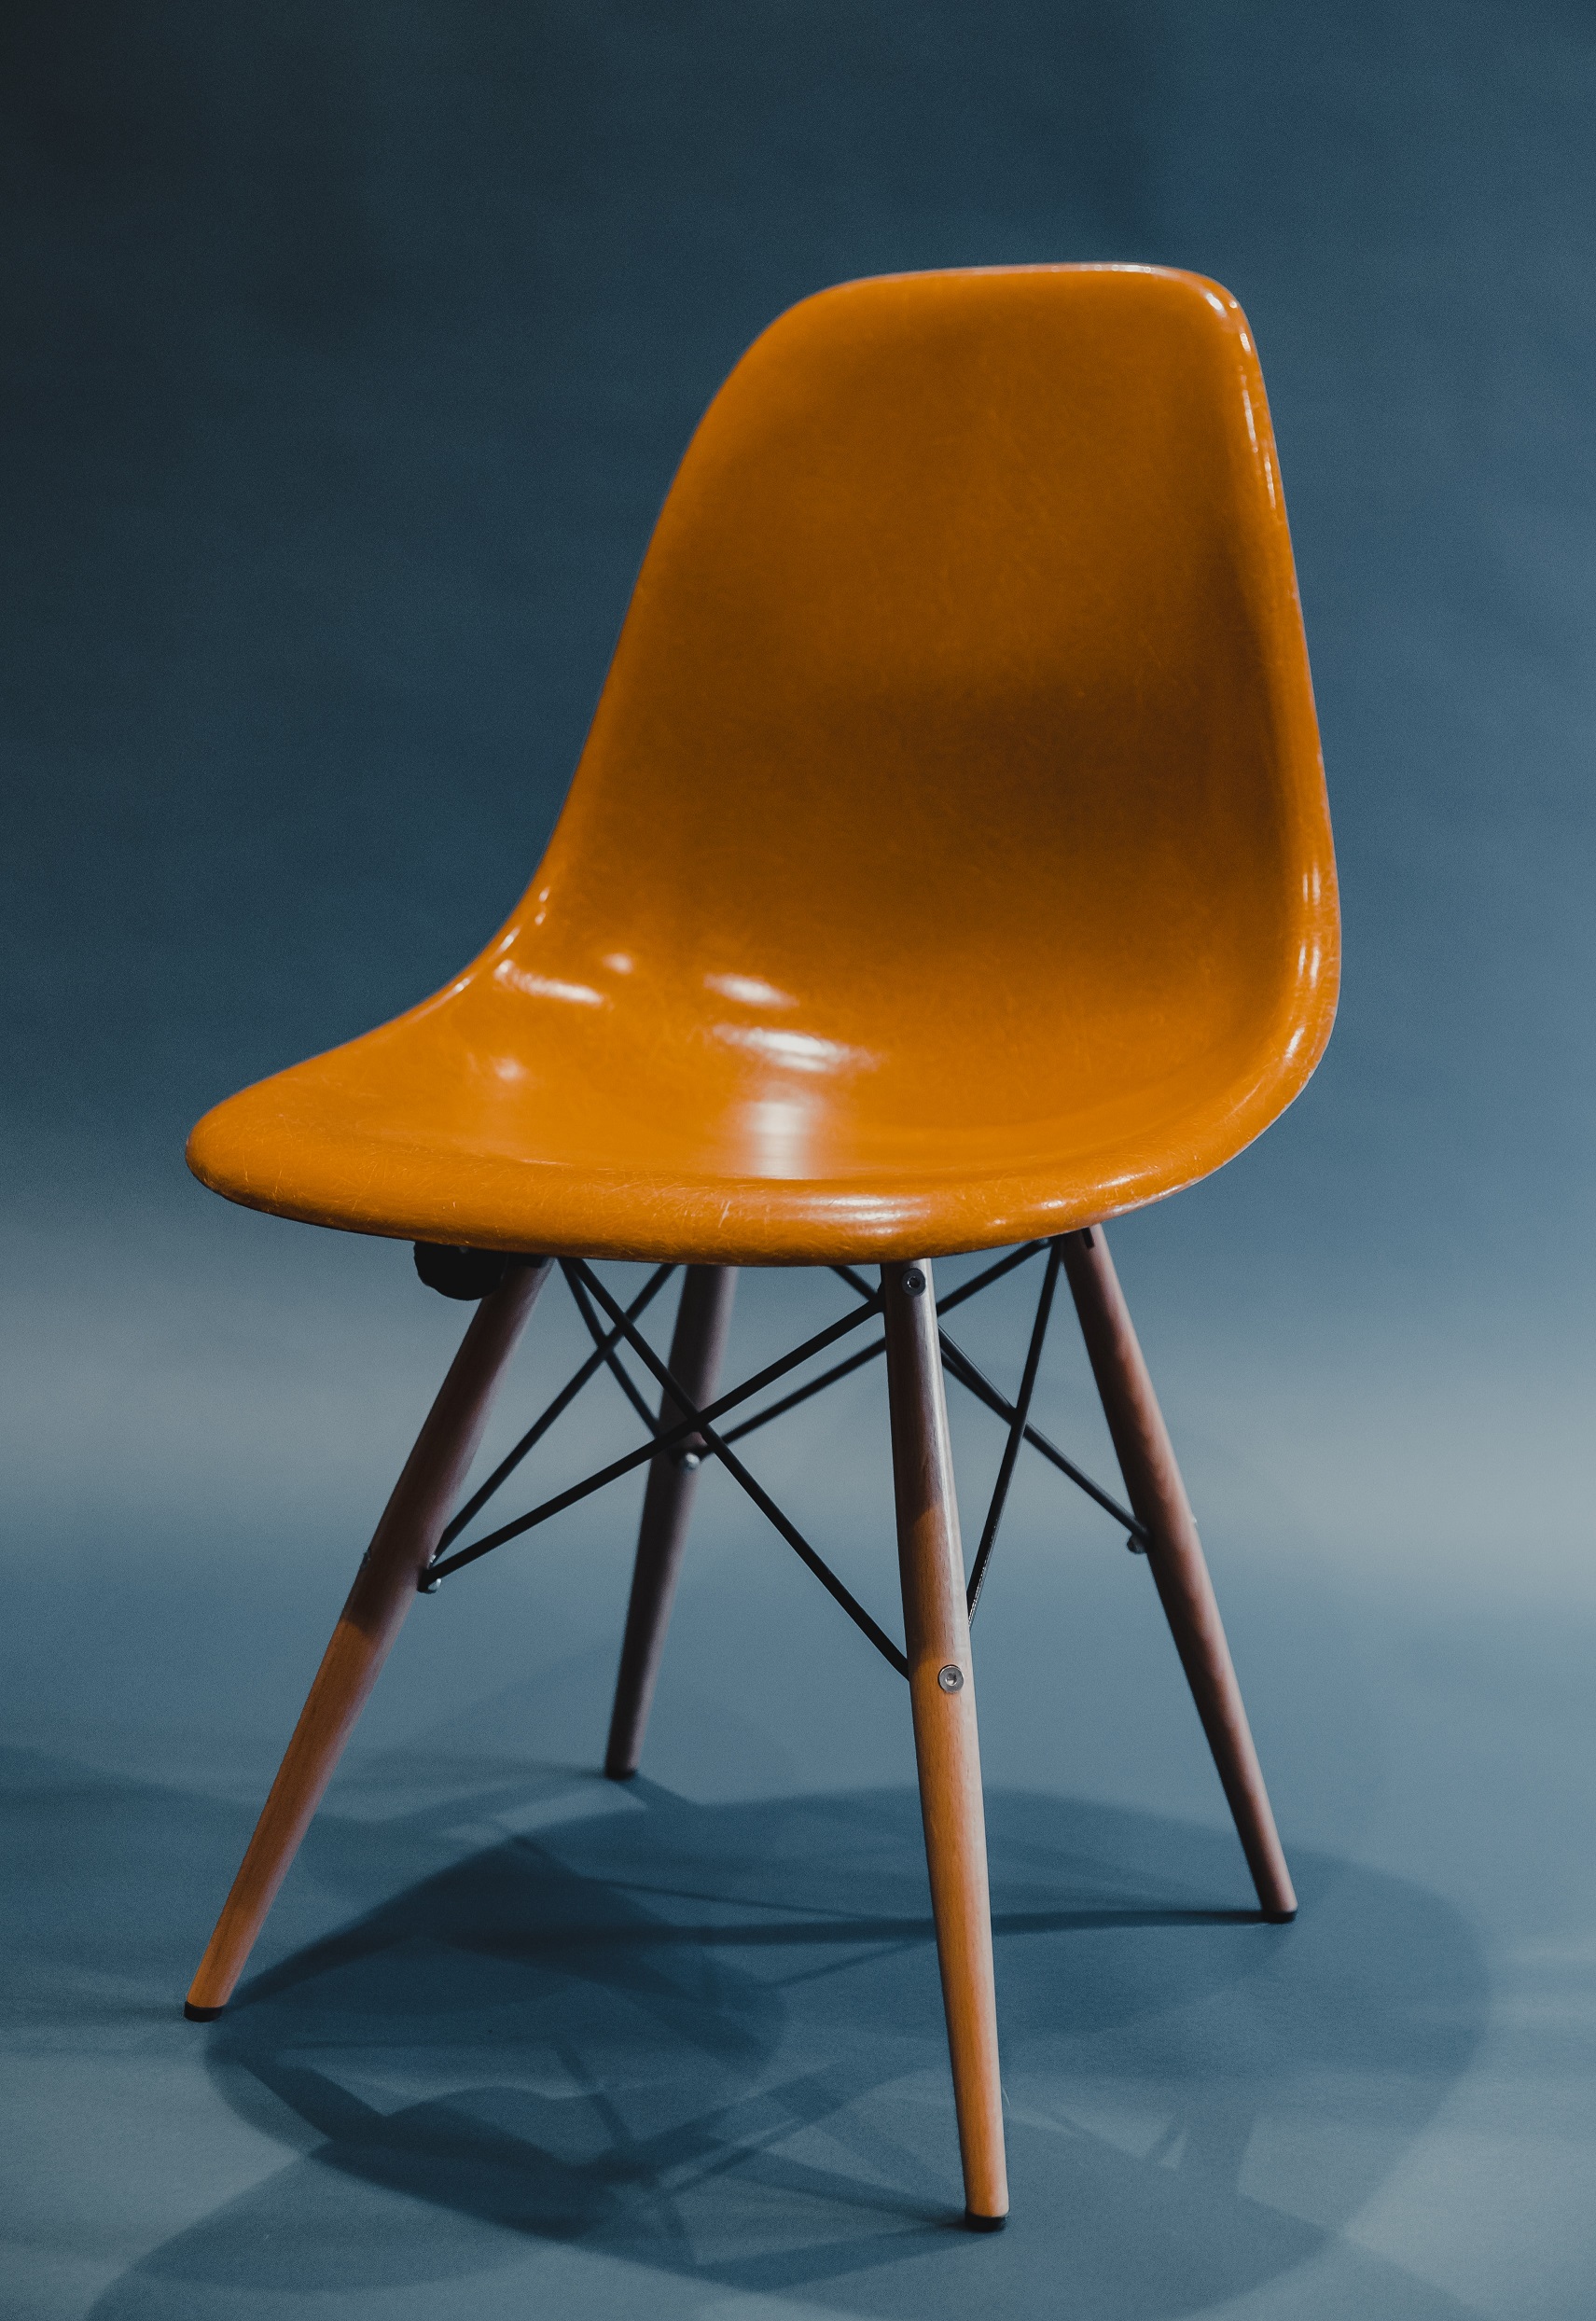 a yellow IKEA style chair on a blue background.